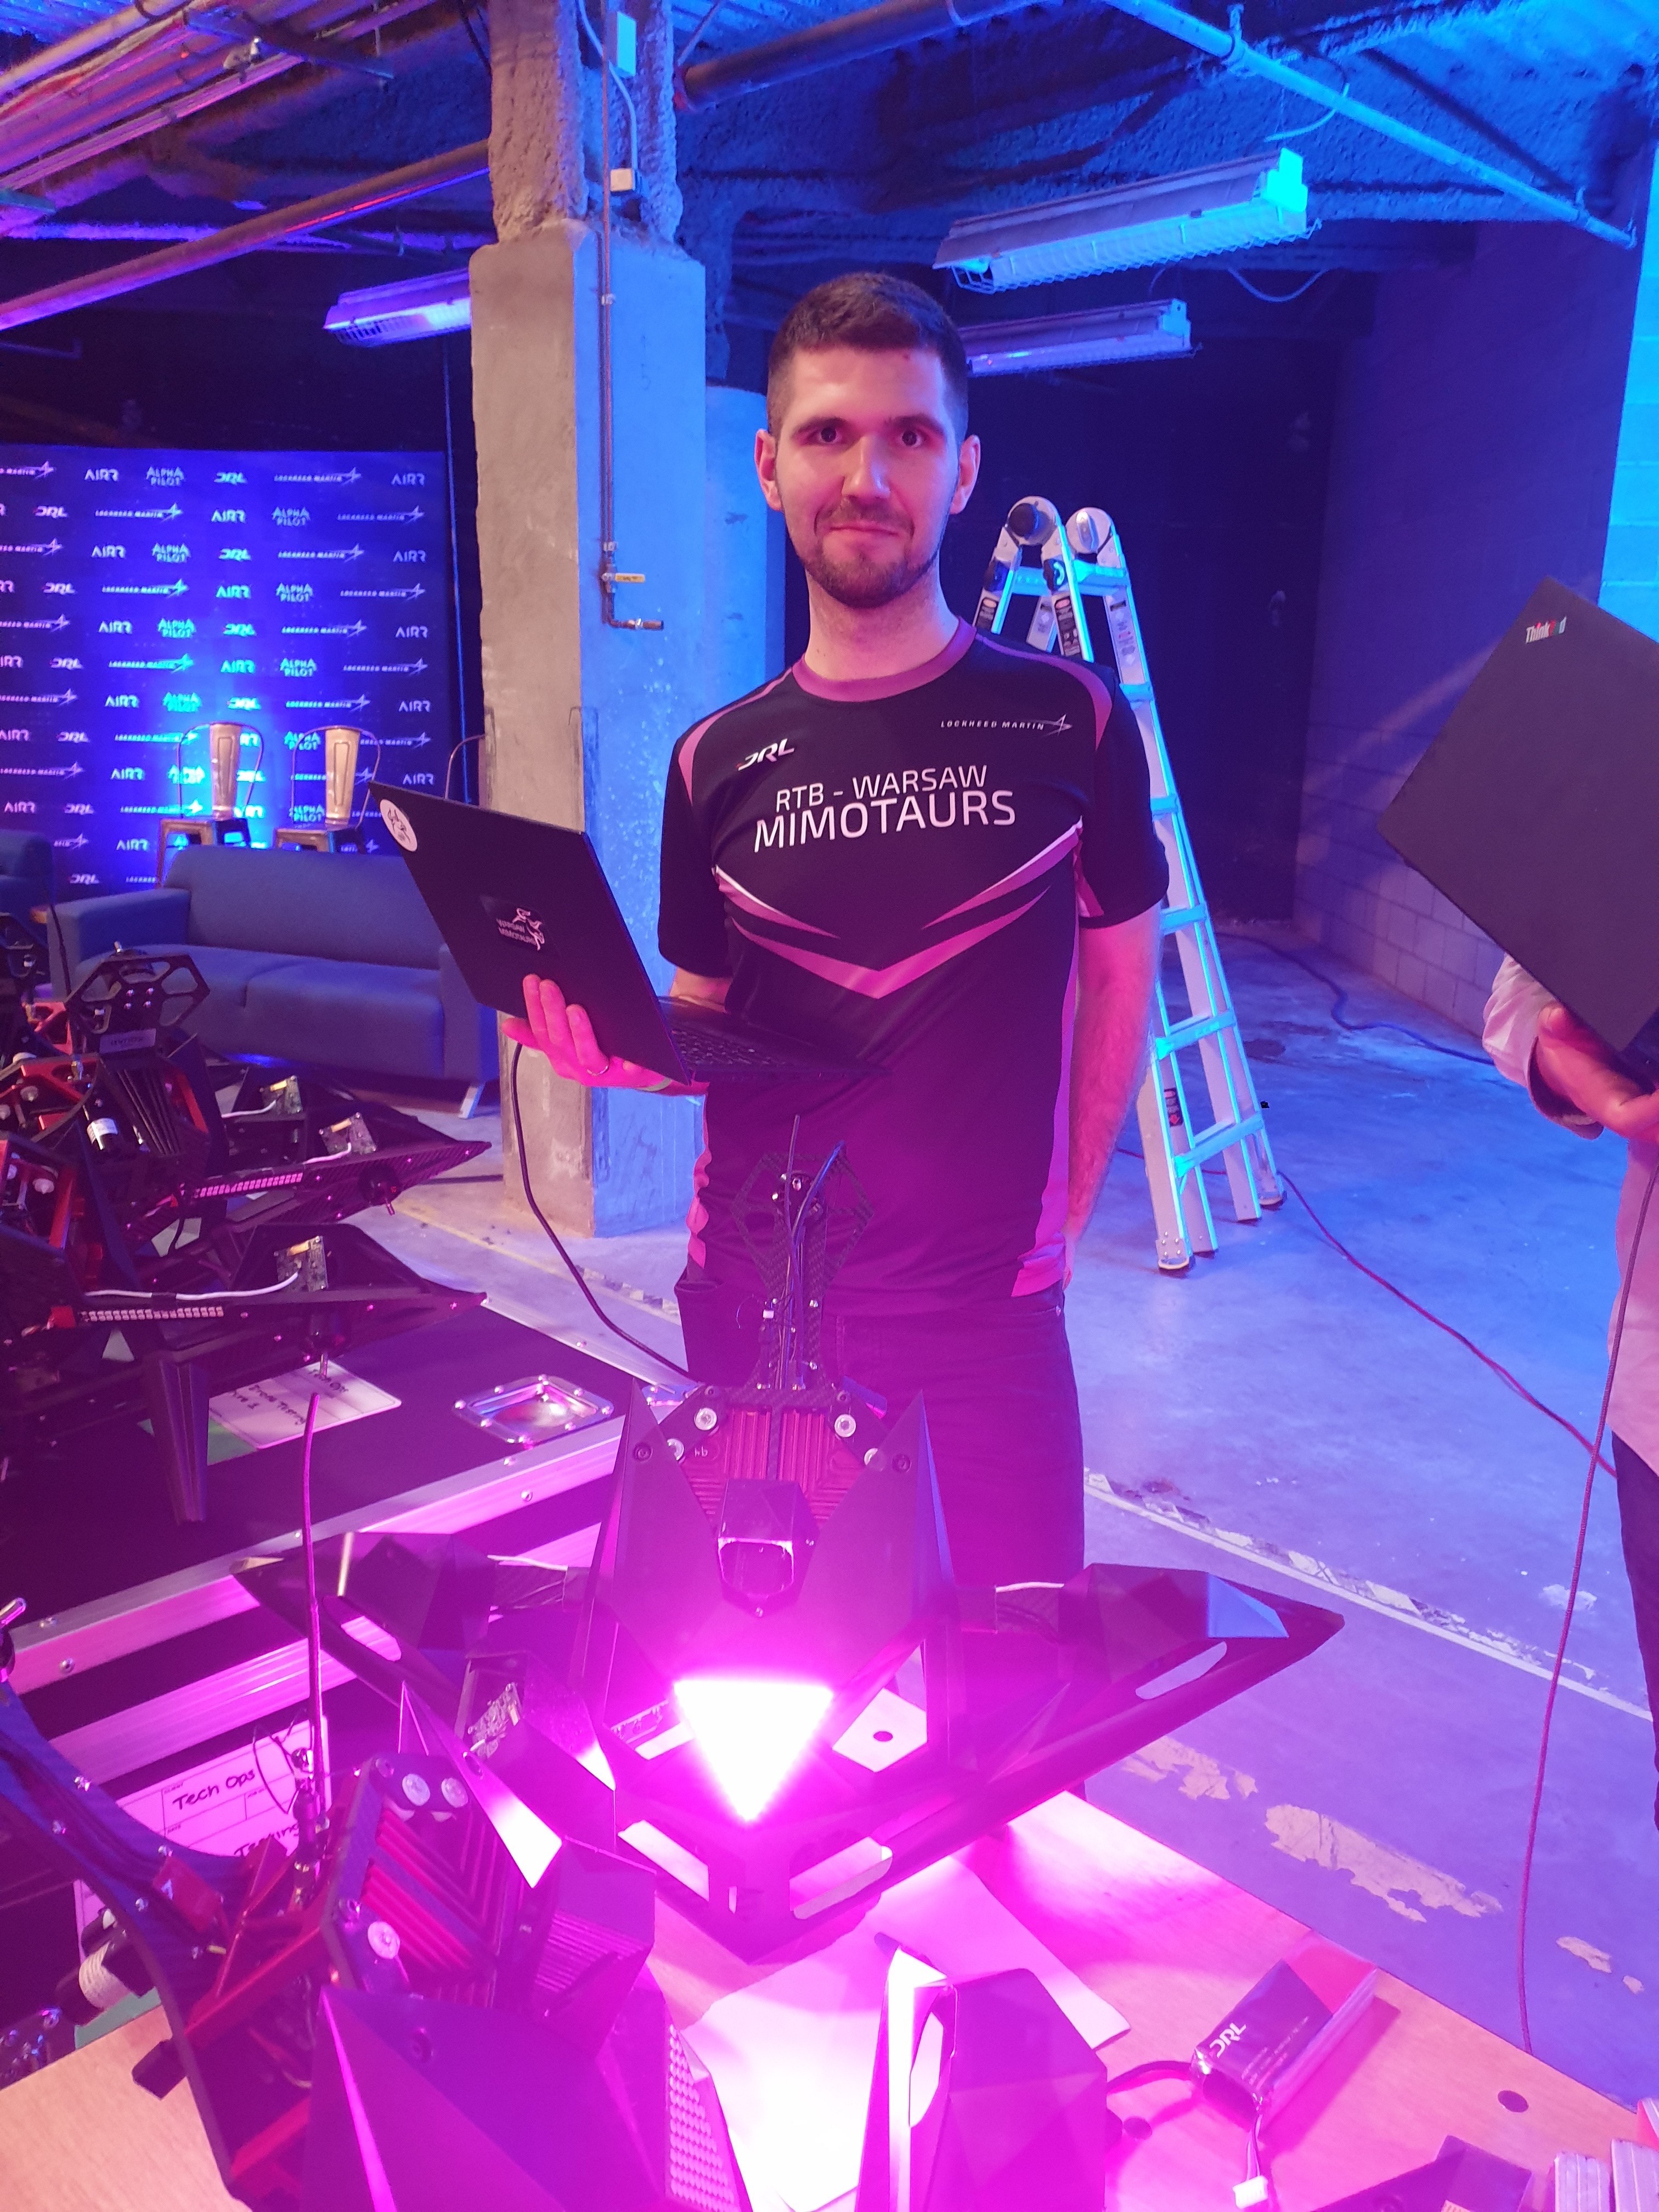 RTB - Warsaw MIMotaurs competitive drone places in top four of Lockheed Martin and DRL's championship autonomous racing series.